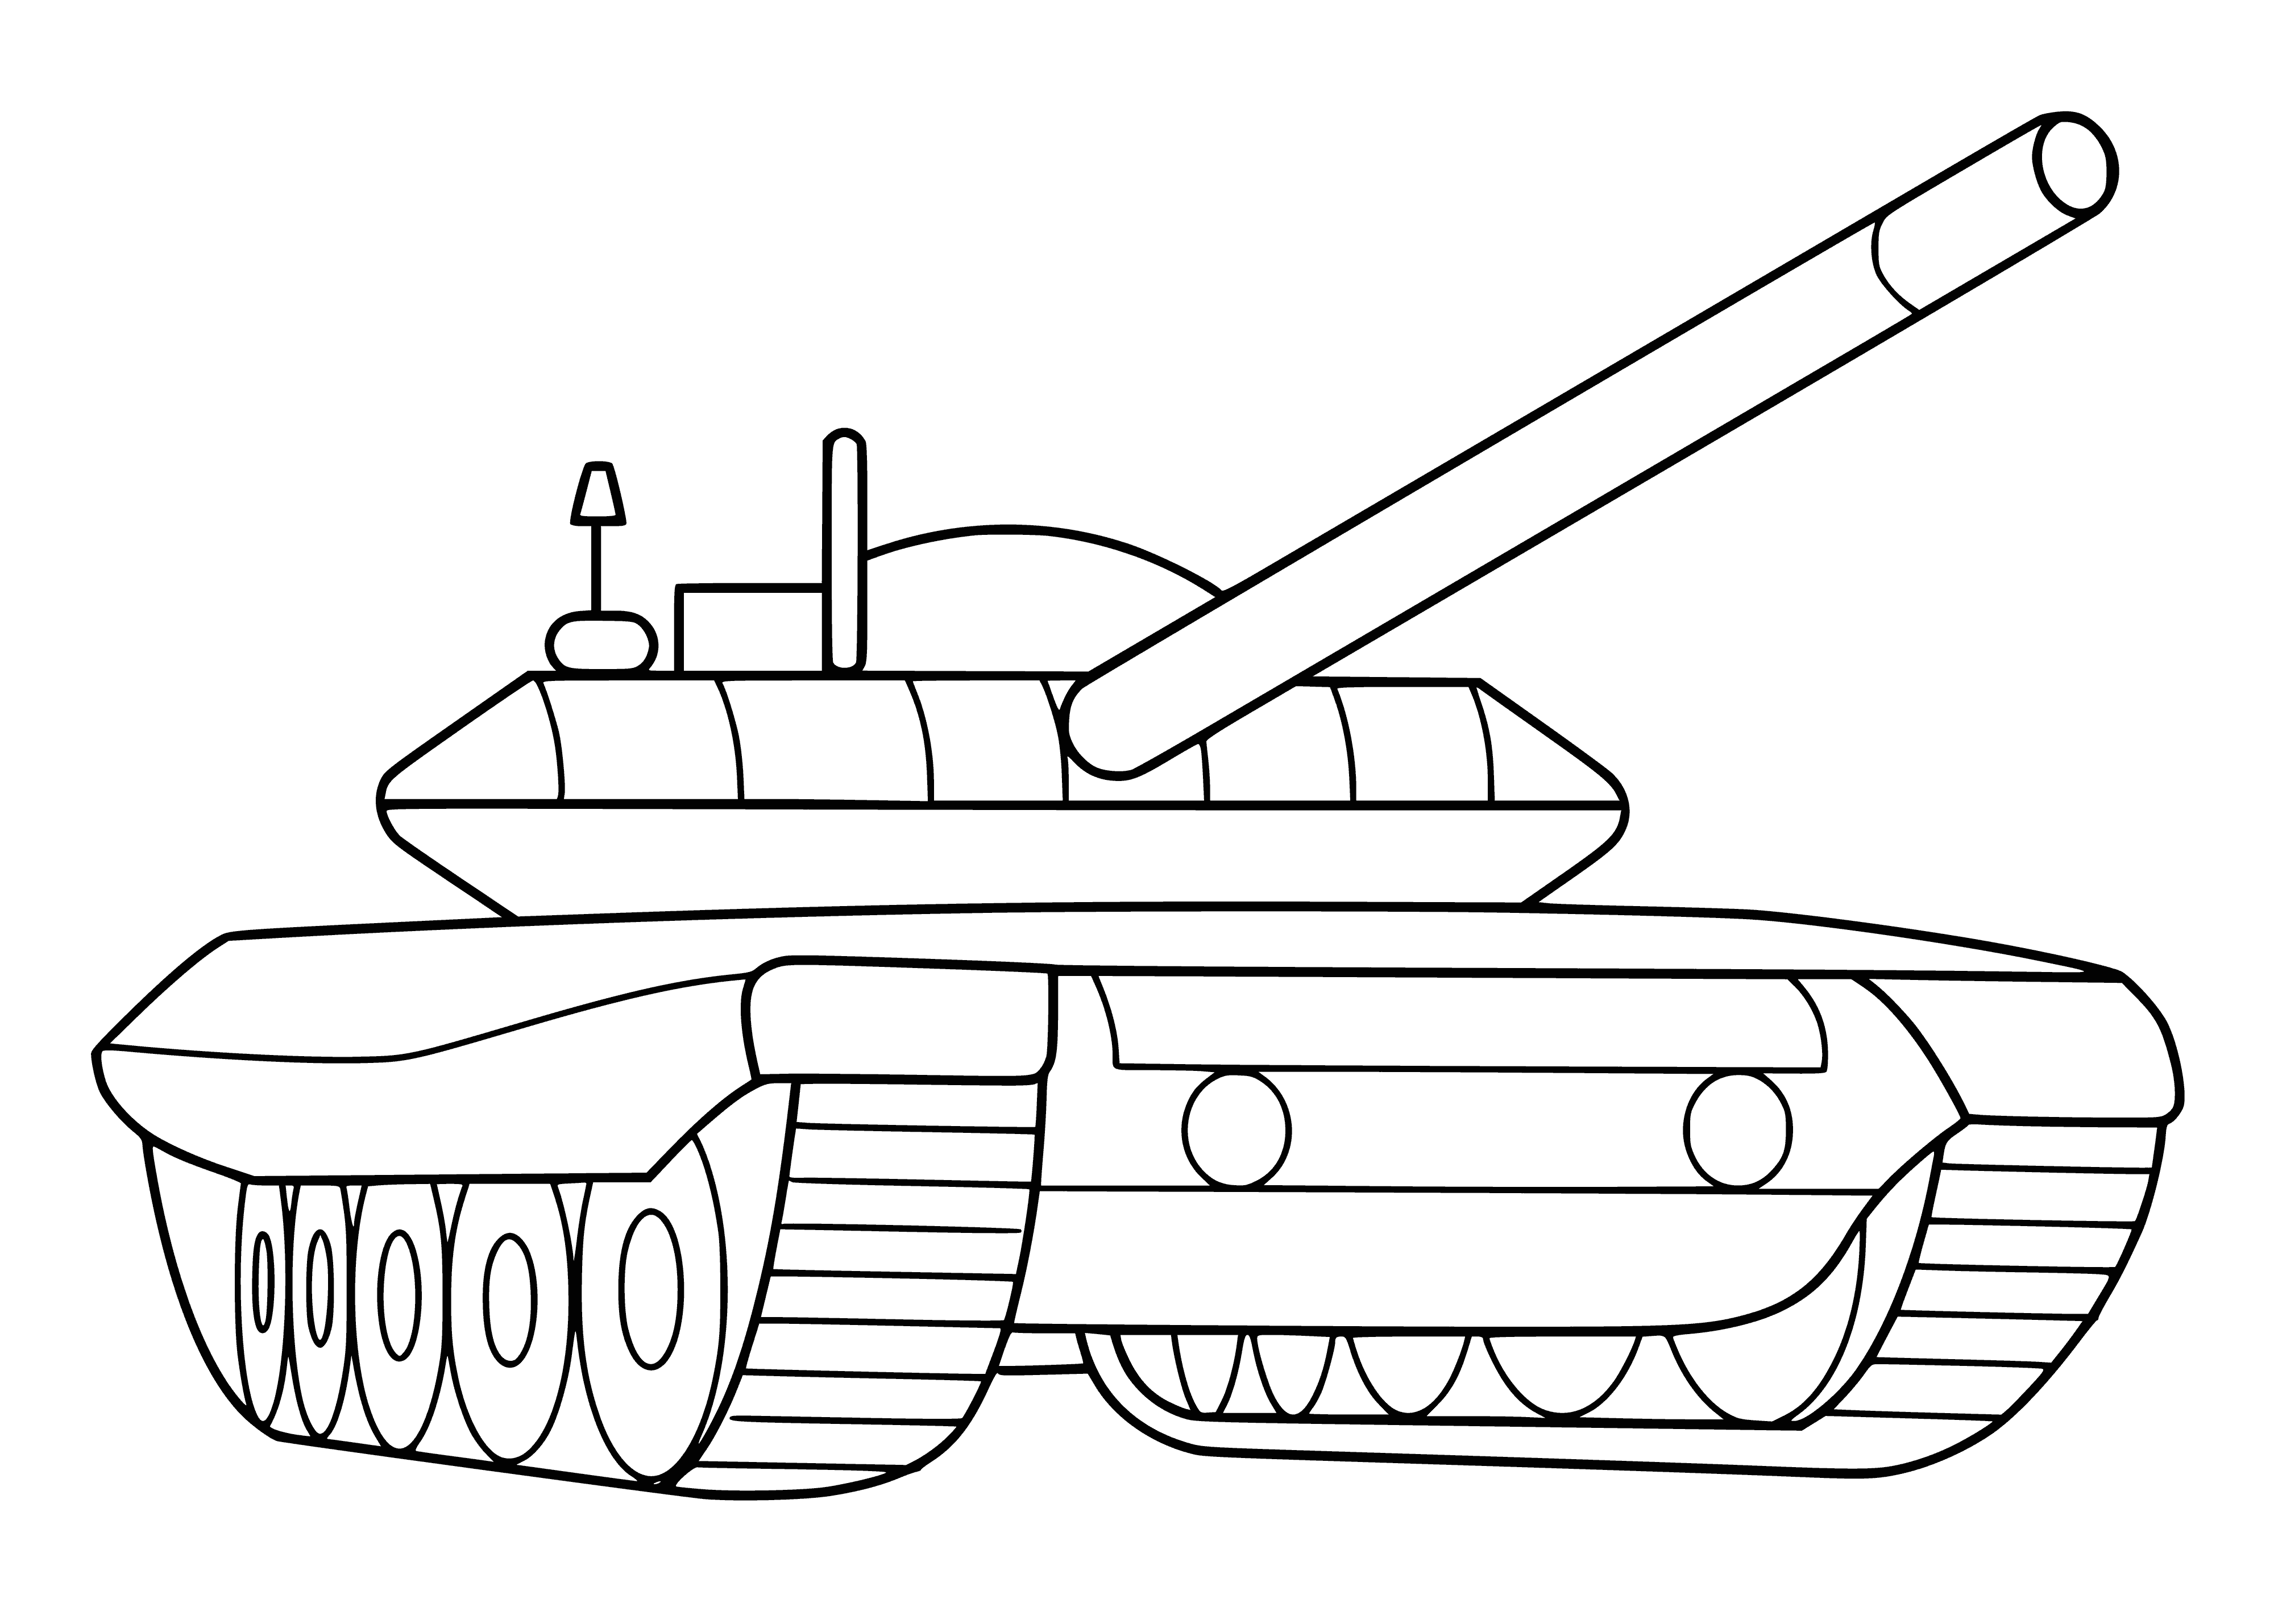 coloring page: A large metal machine with a big gun, side window, back door, and treads.